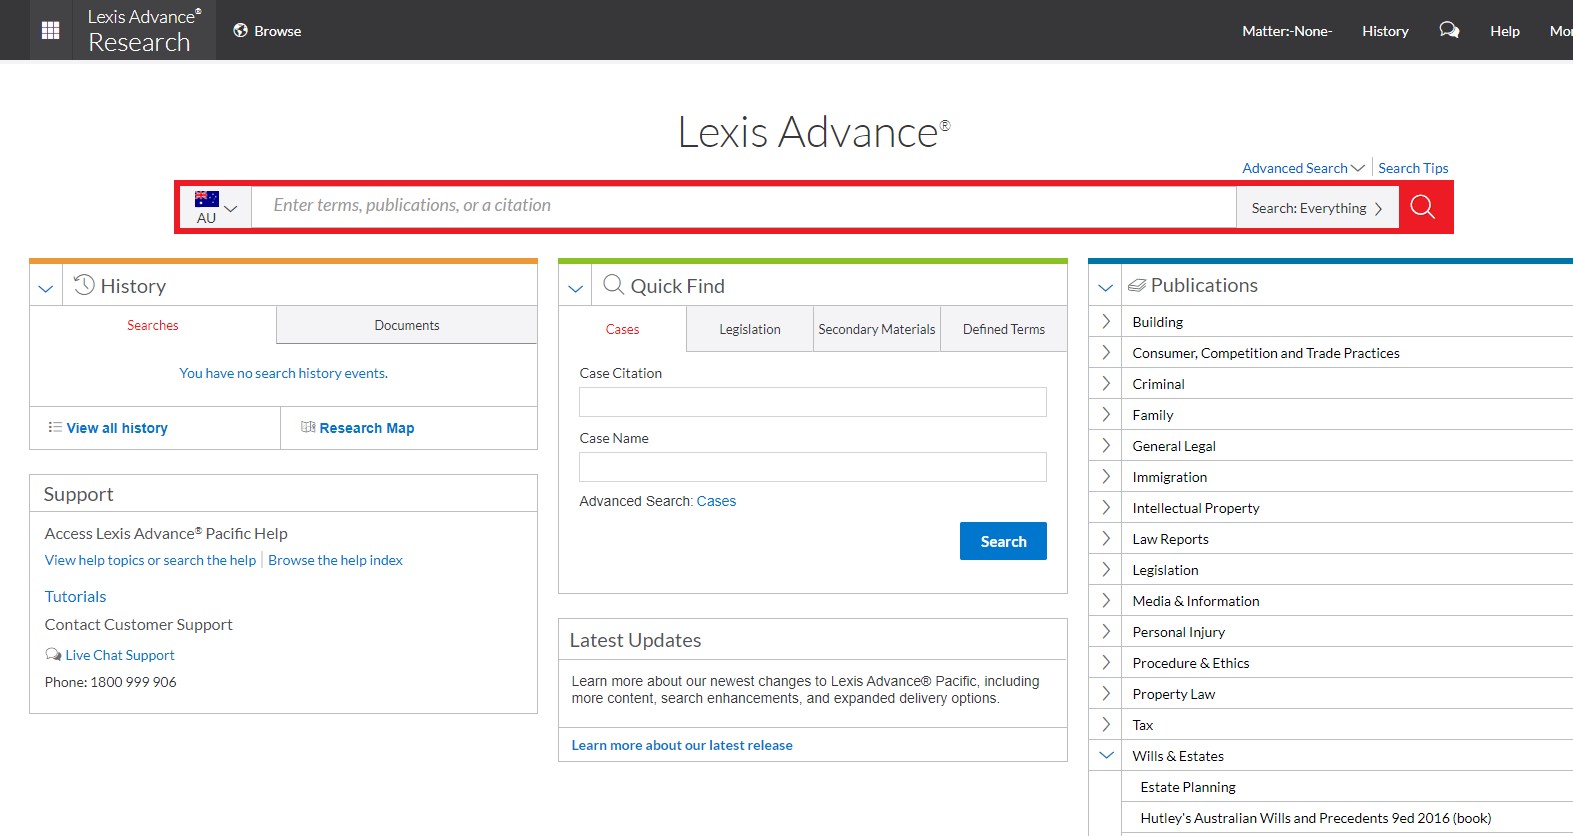 Image of Lexis Advance database home page